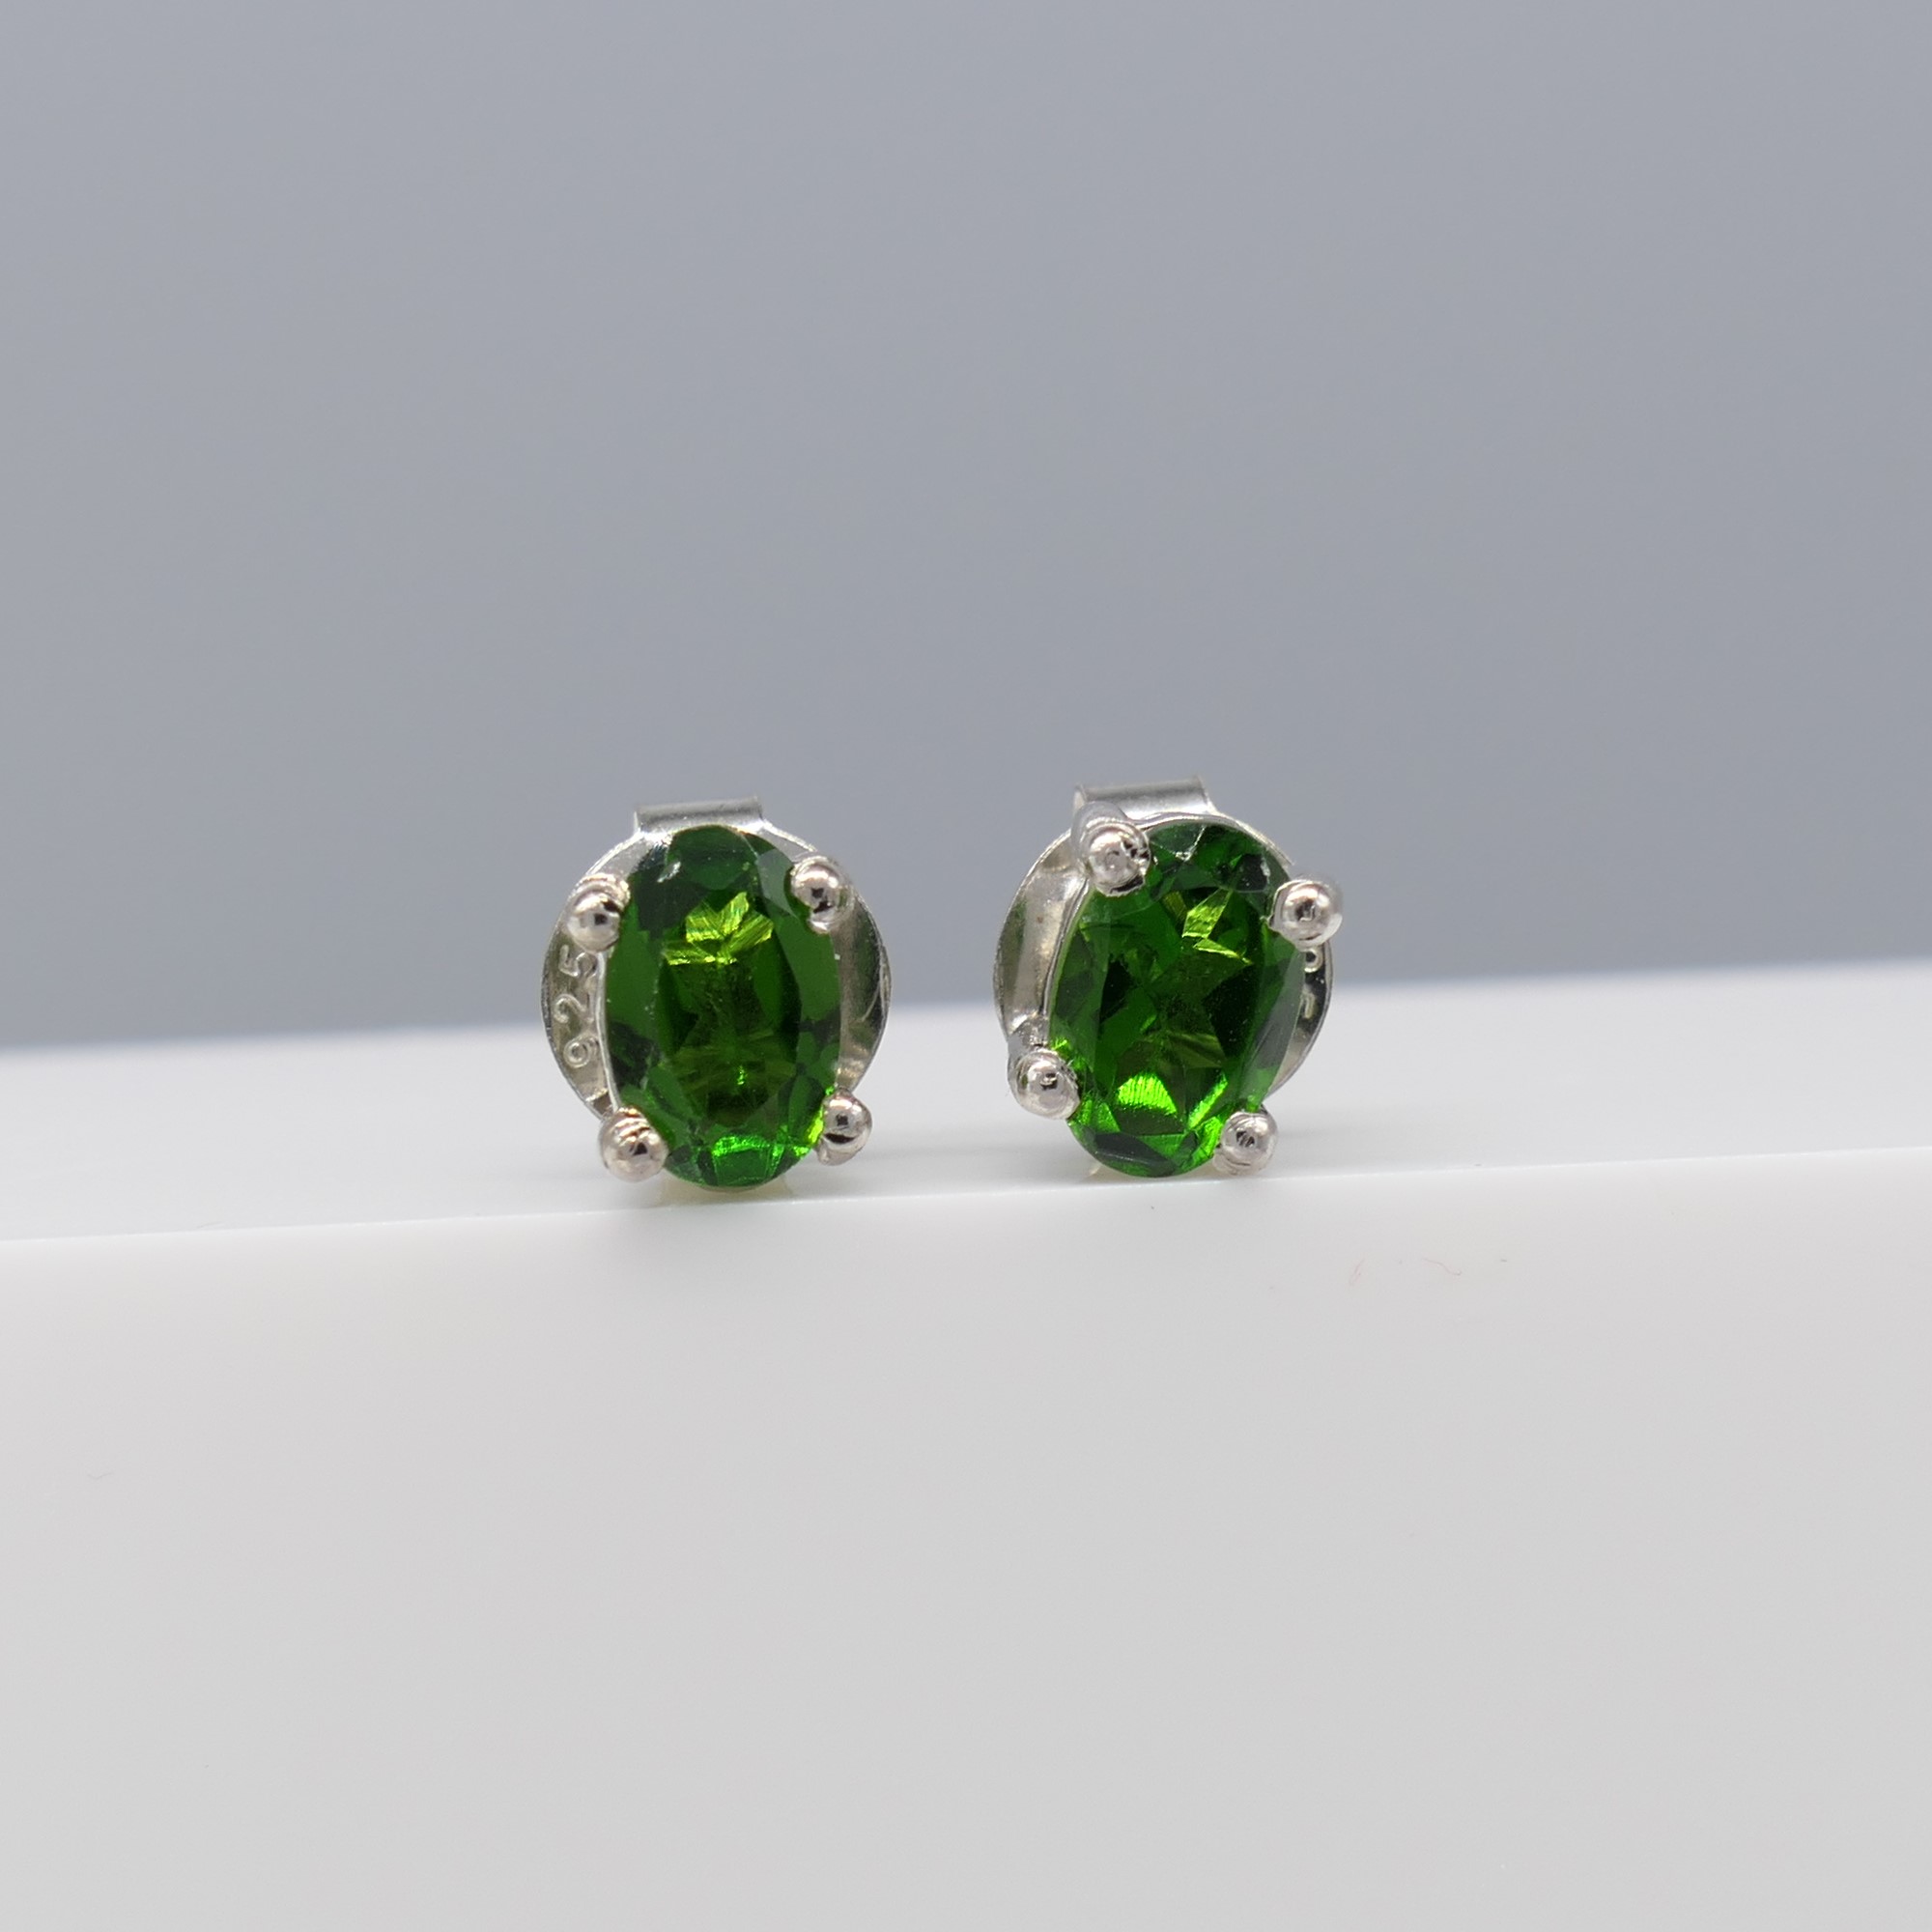 Pair of Natural Chrome Diopside Ear Studs In Sterling Silver